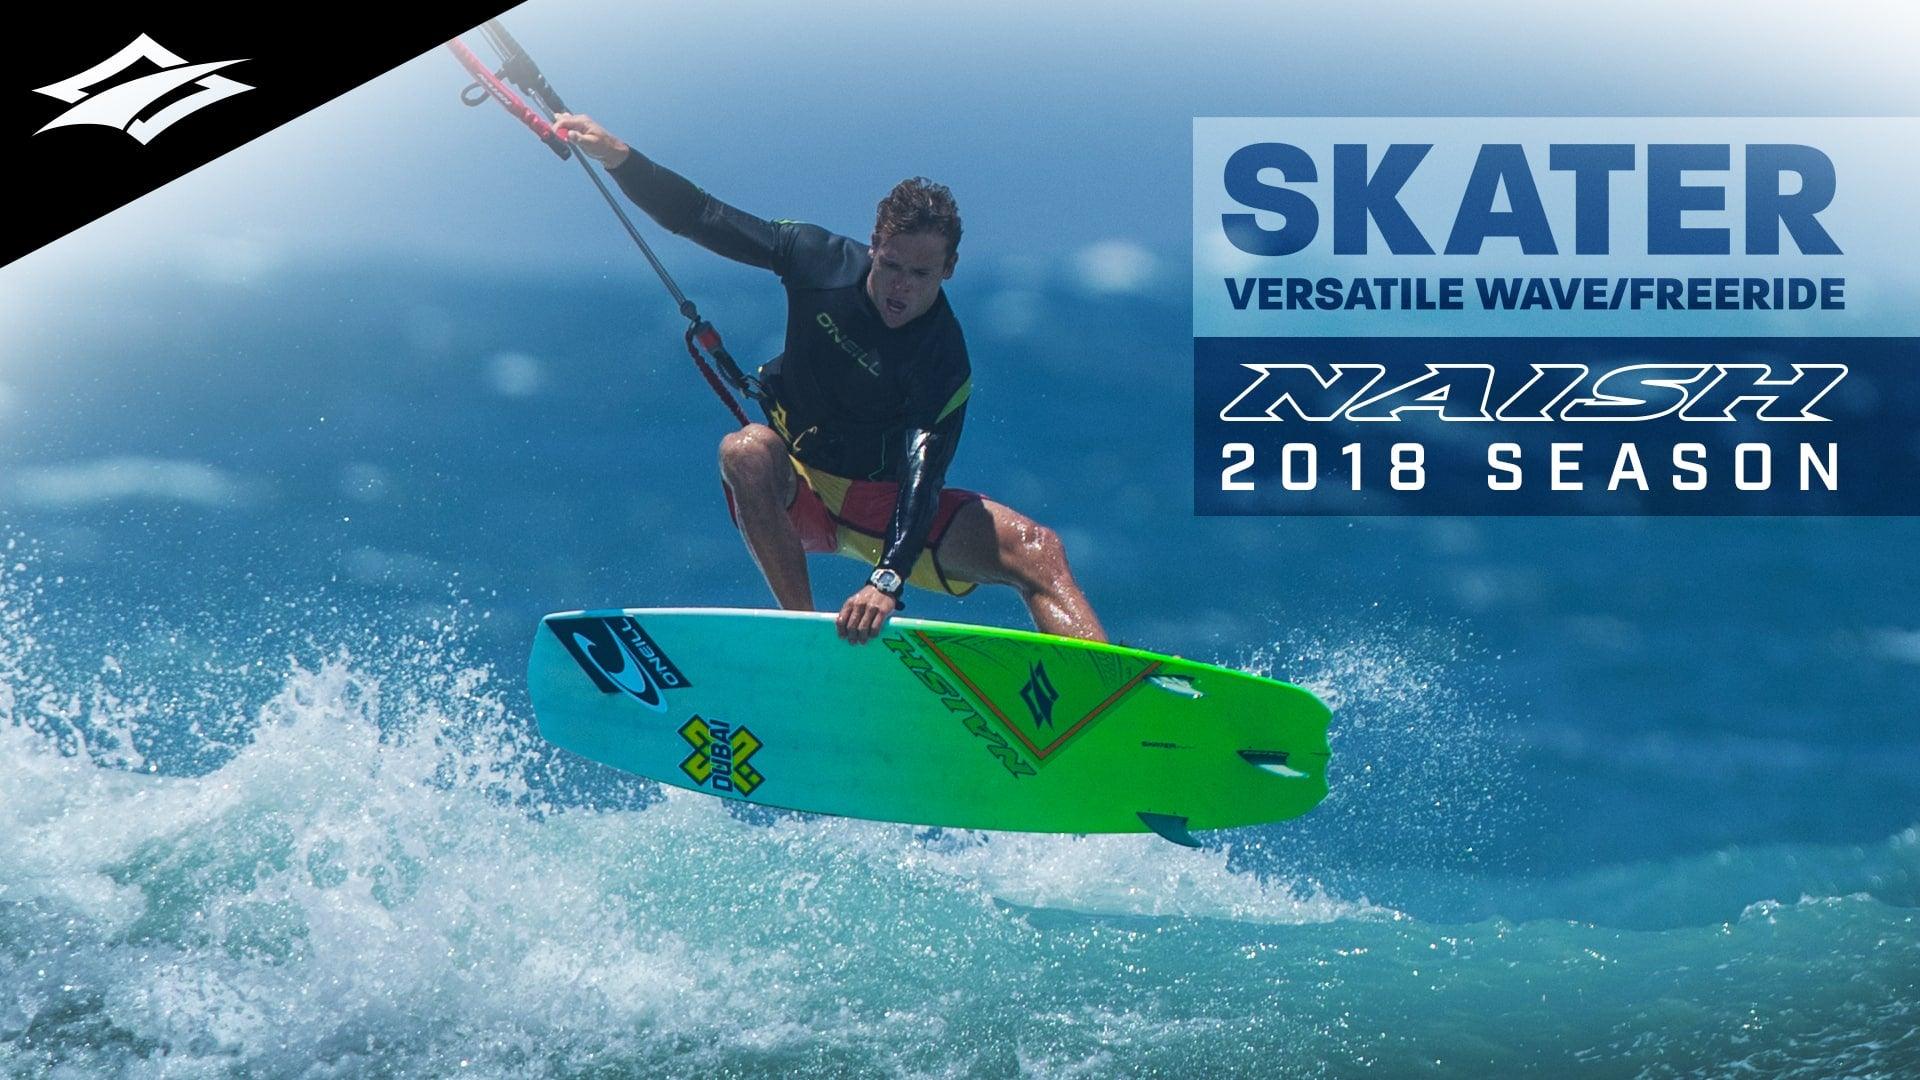 2018 Skater | Versatile Wave and Freeride Directional - Naish.com